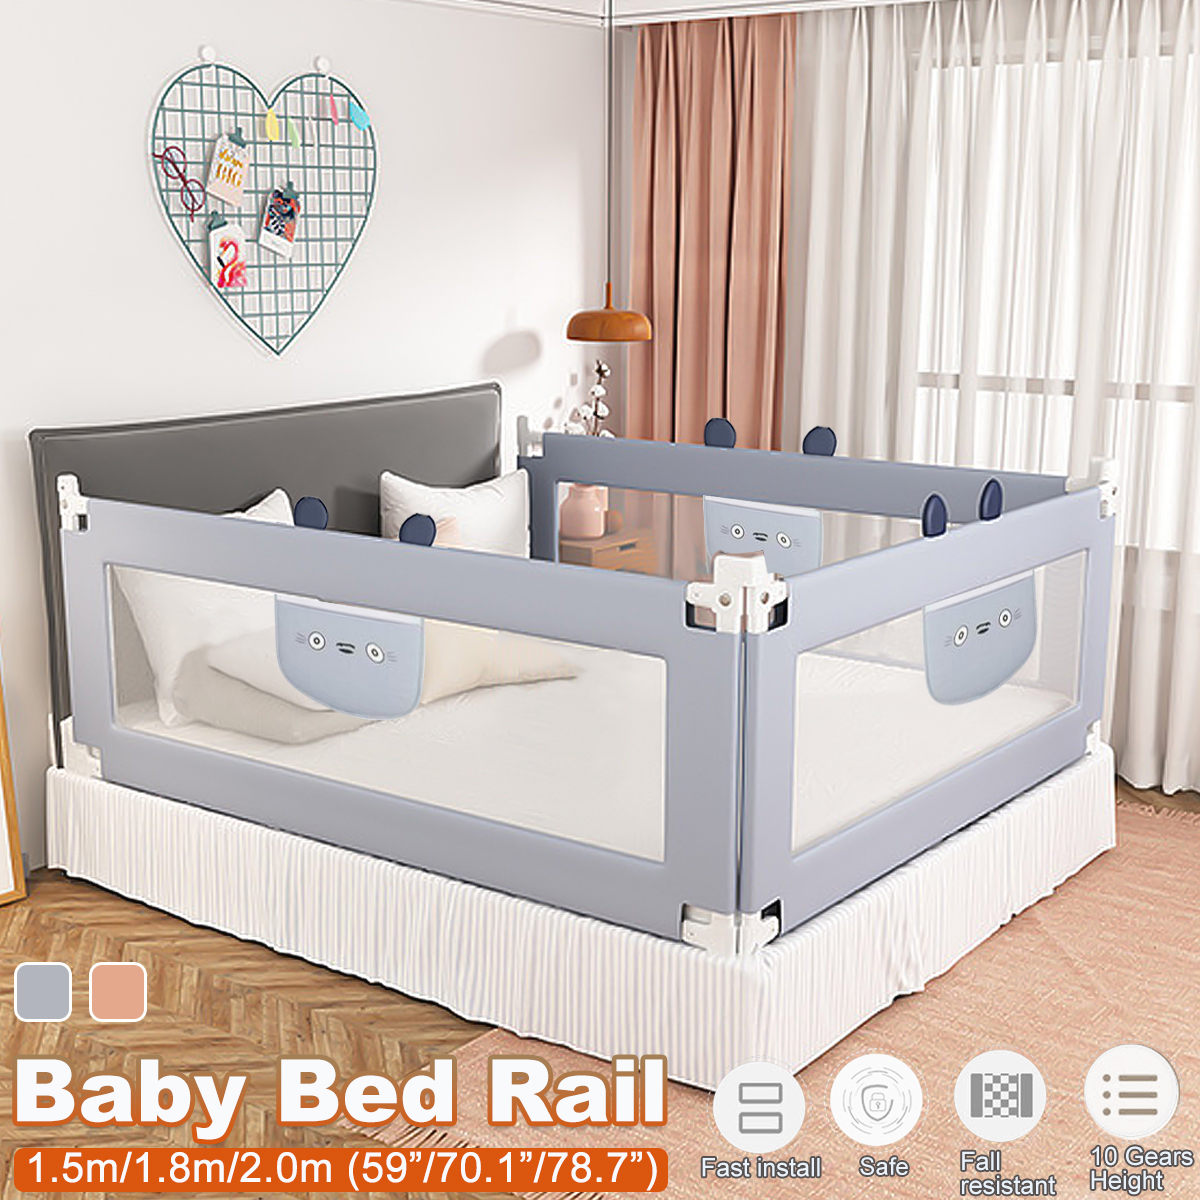 15m18m20m-Adjustable-Folding-Kids-Safety-Bed-RailBedRail-Cot-Guard-Protecte-Child-Toddler-1918099-1